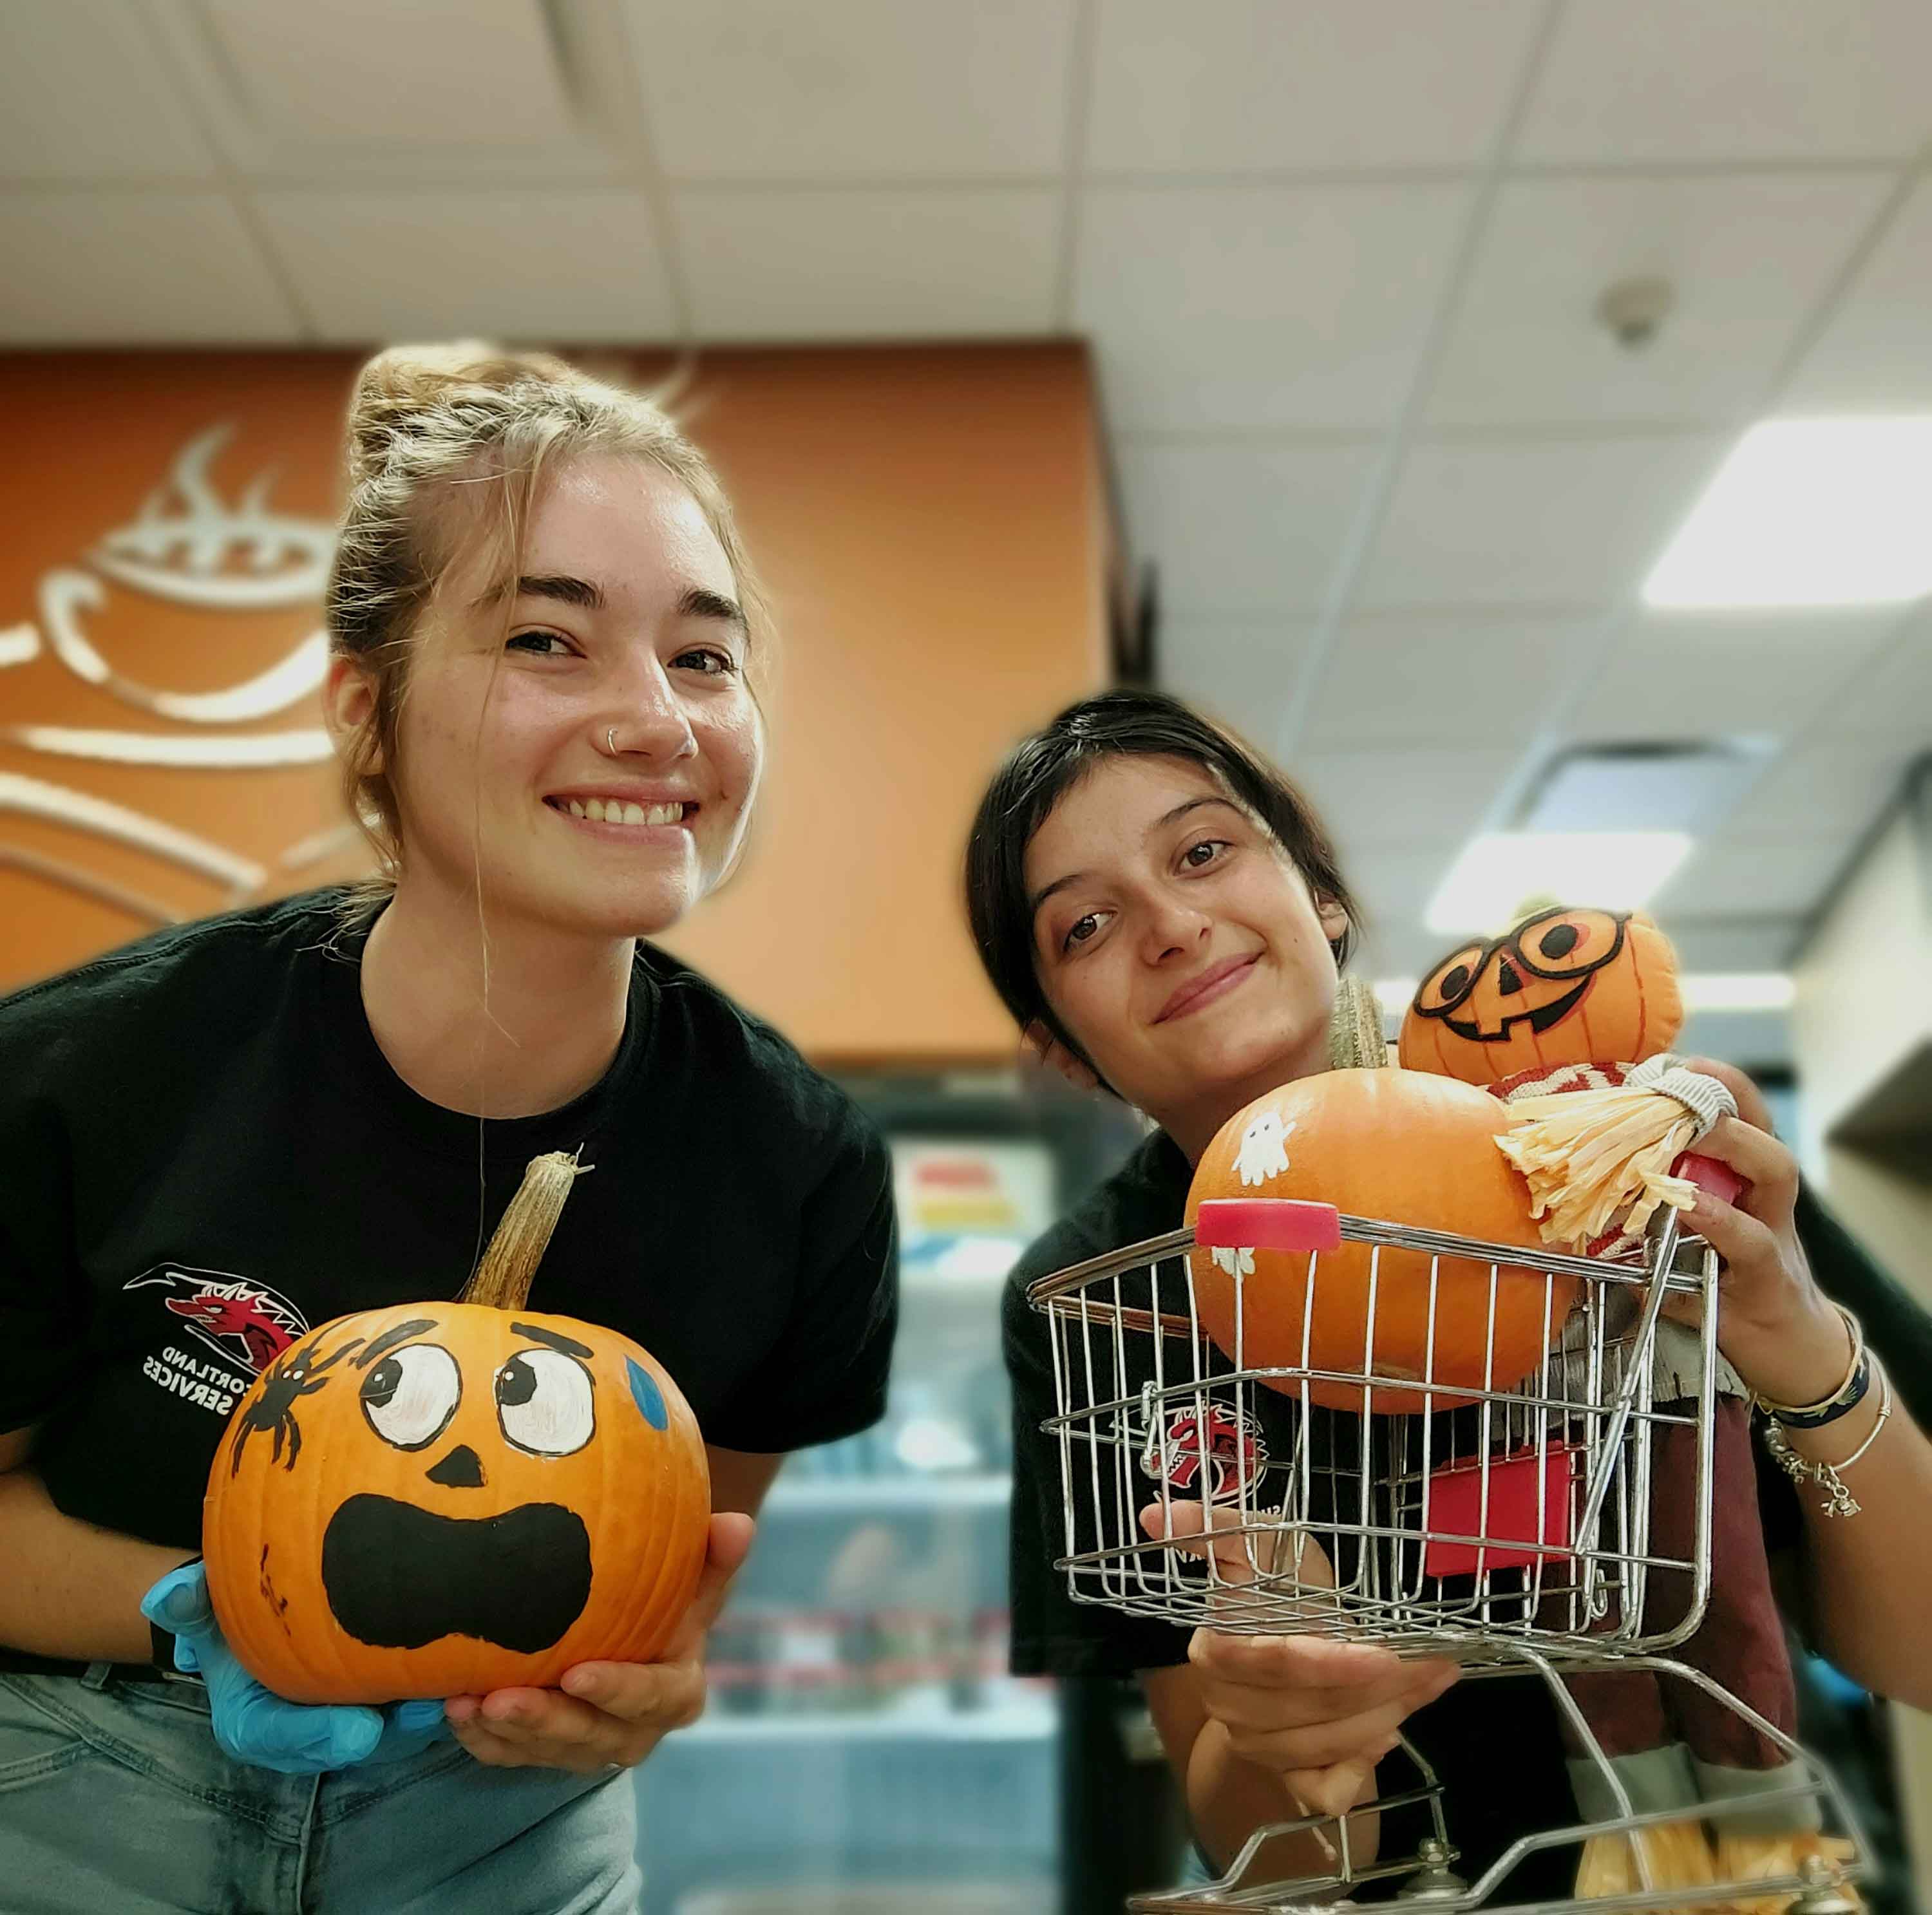 Students working at the Bookmark Cafe with pumpkins